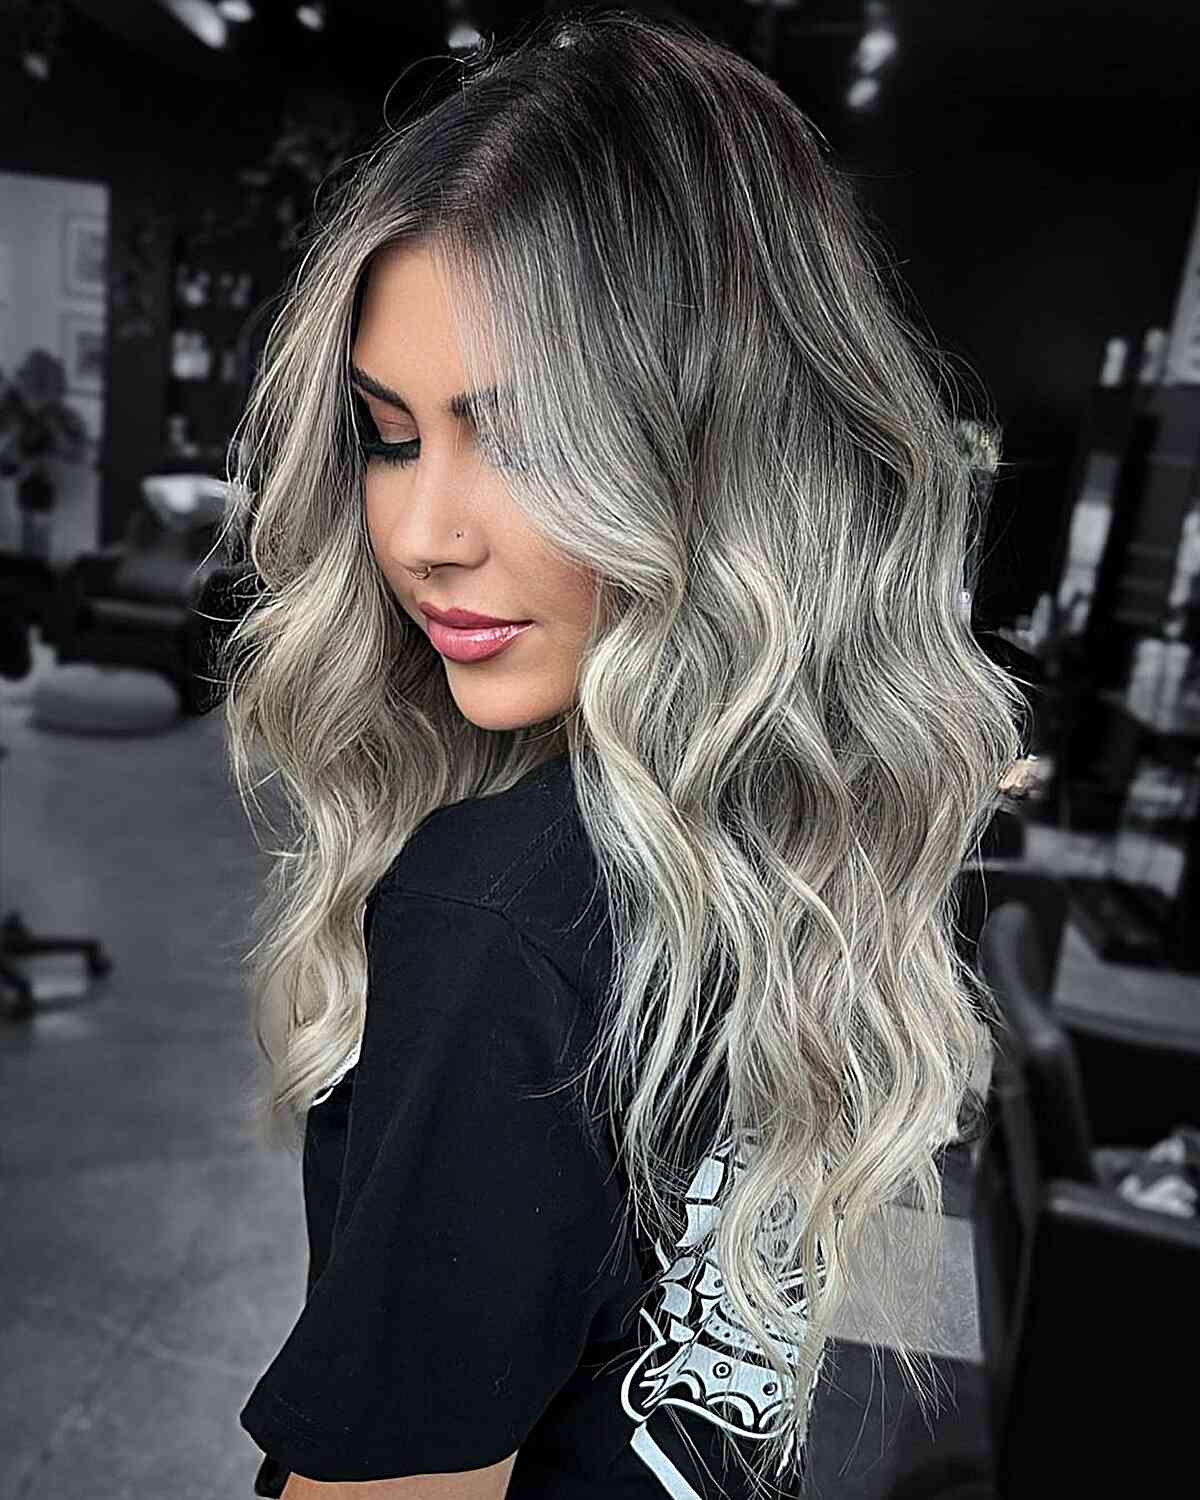 Very Dark Rooted Hair with Icy Blonde Highlights